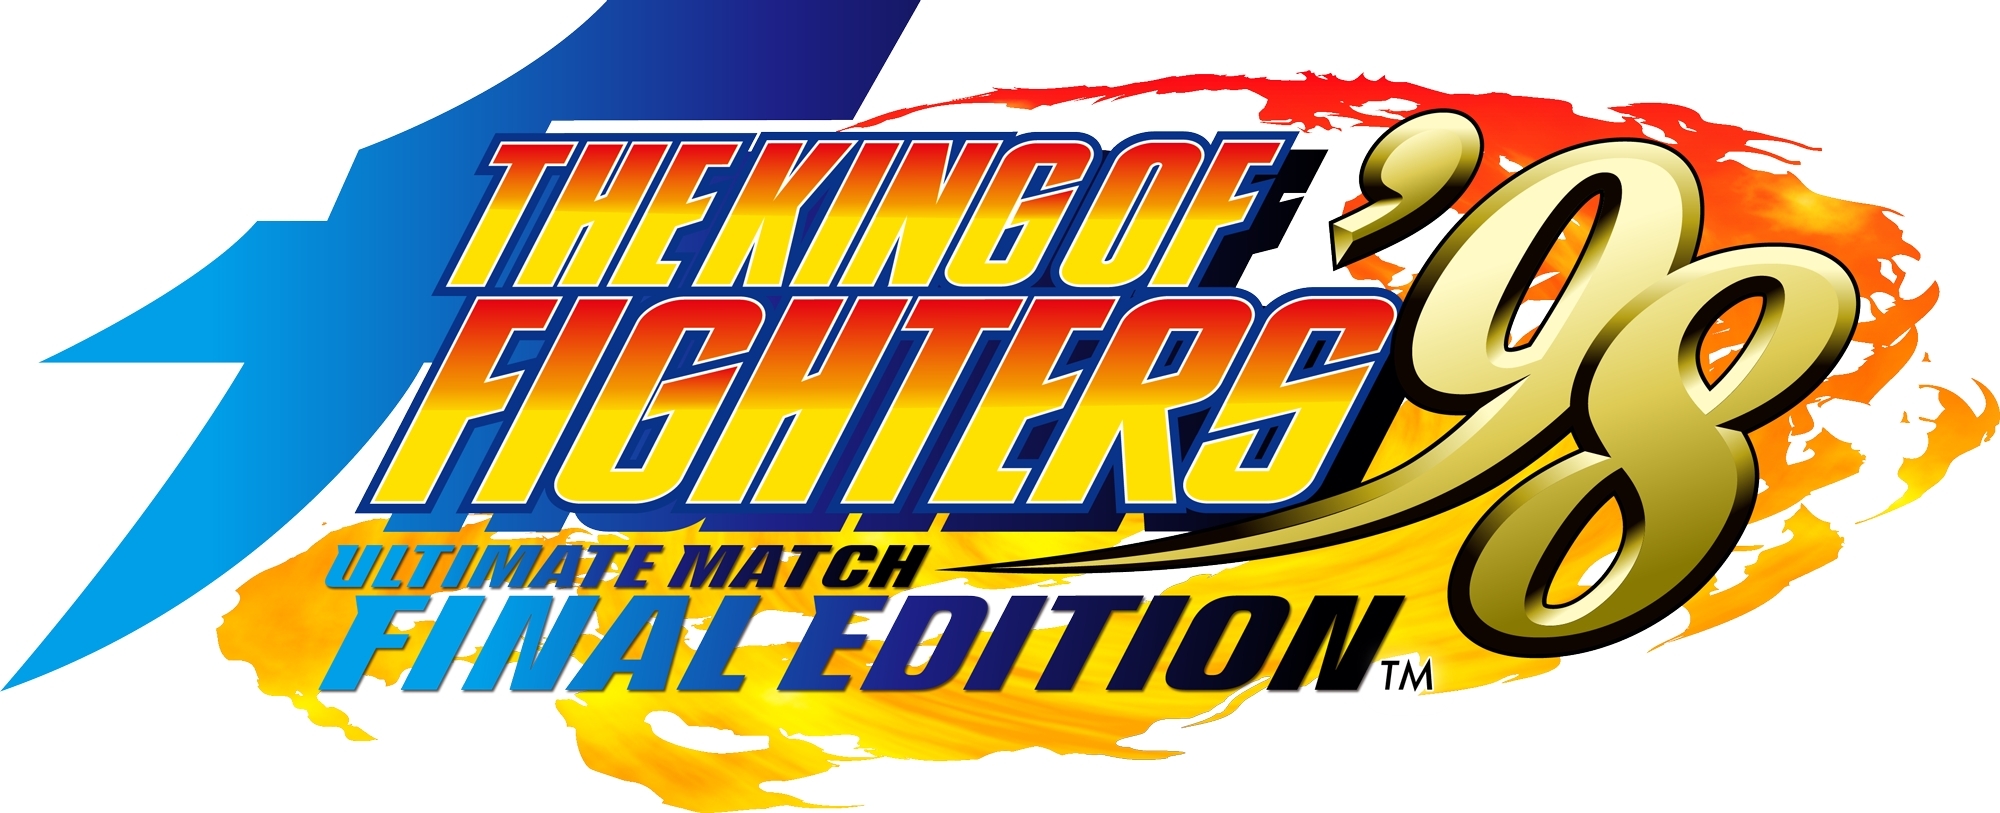 The King of Fighters 98 Ultimate Match (Playstation 2/Xbox Live